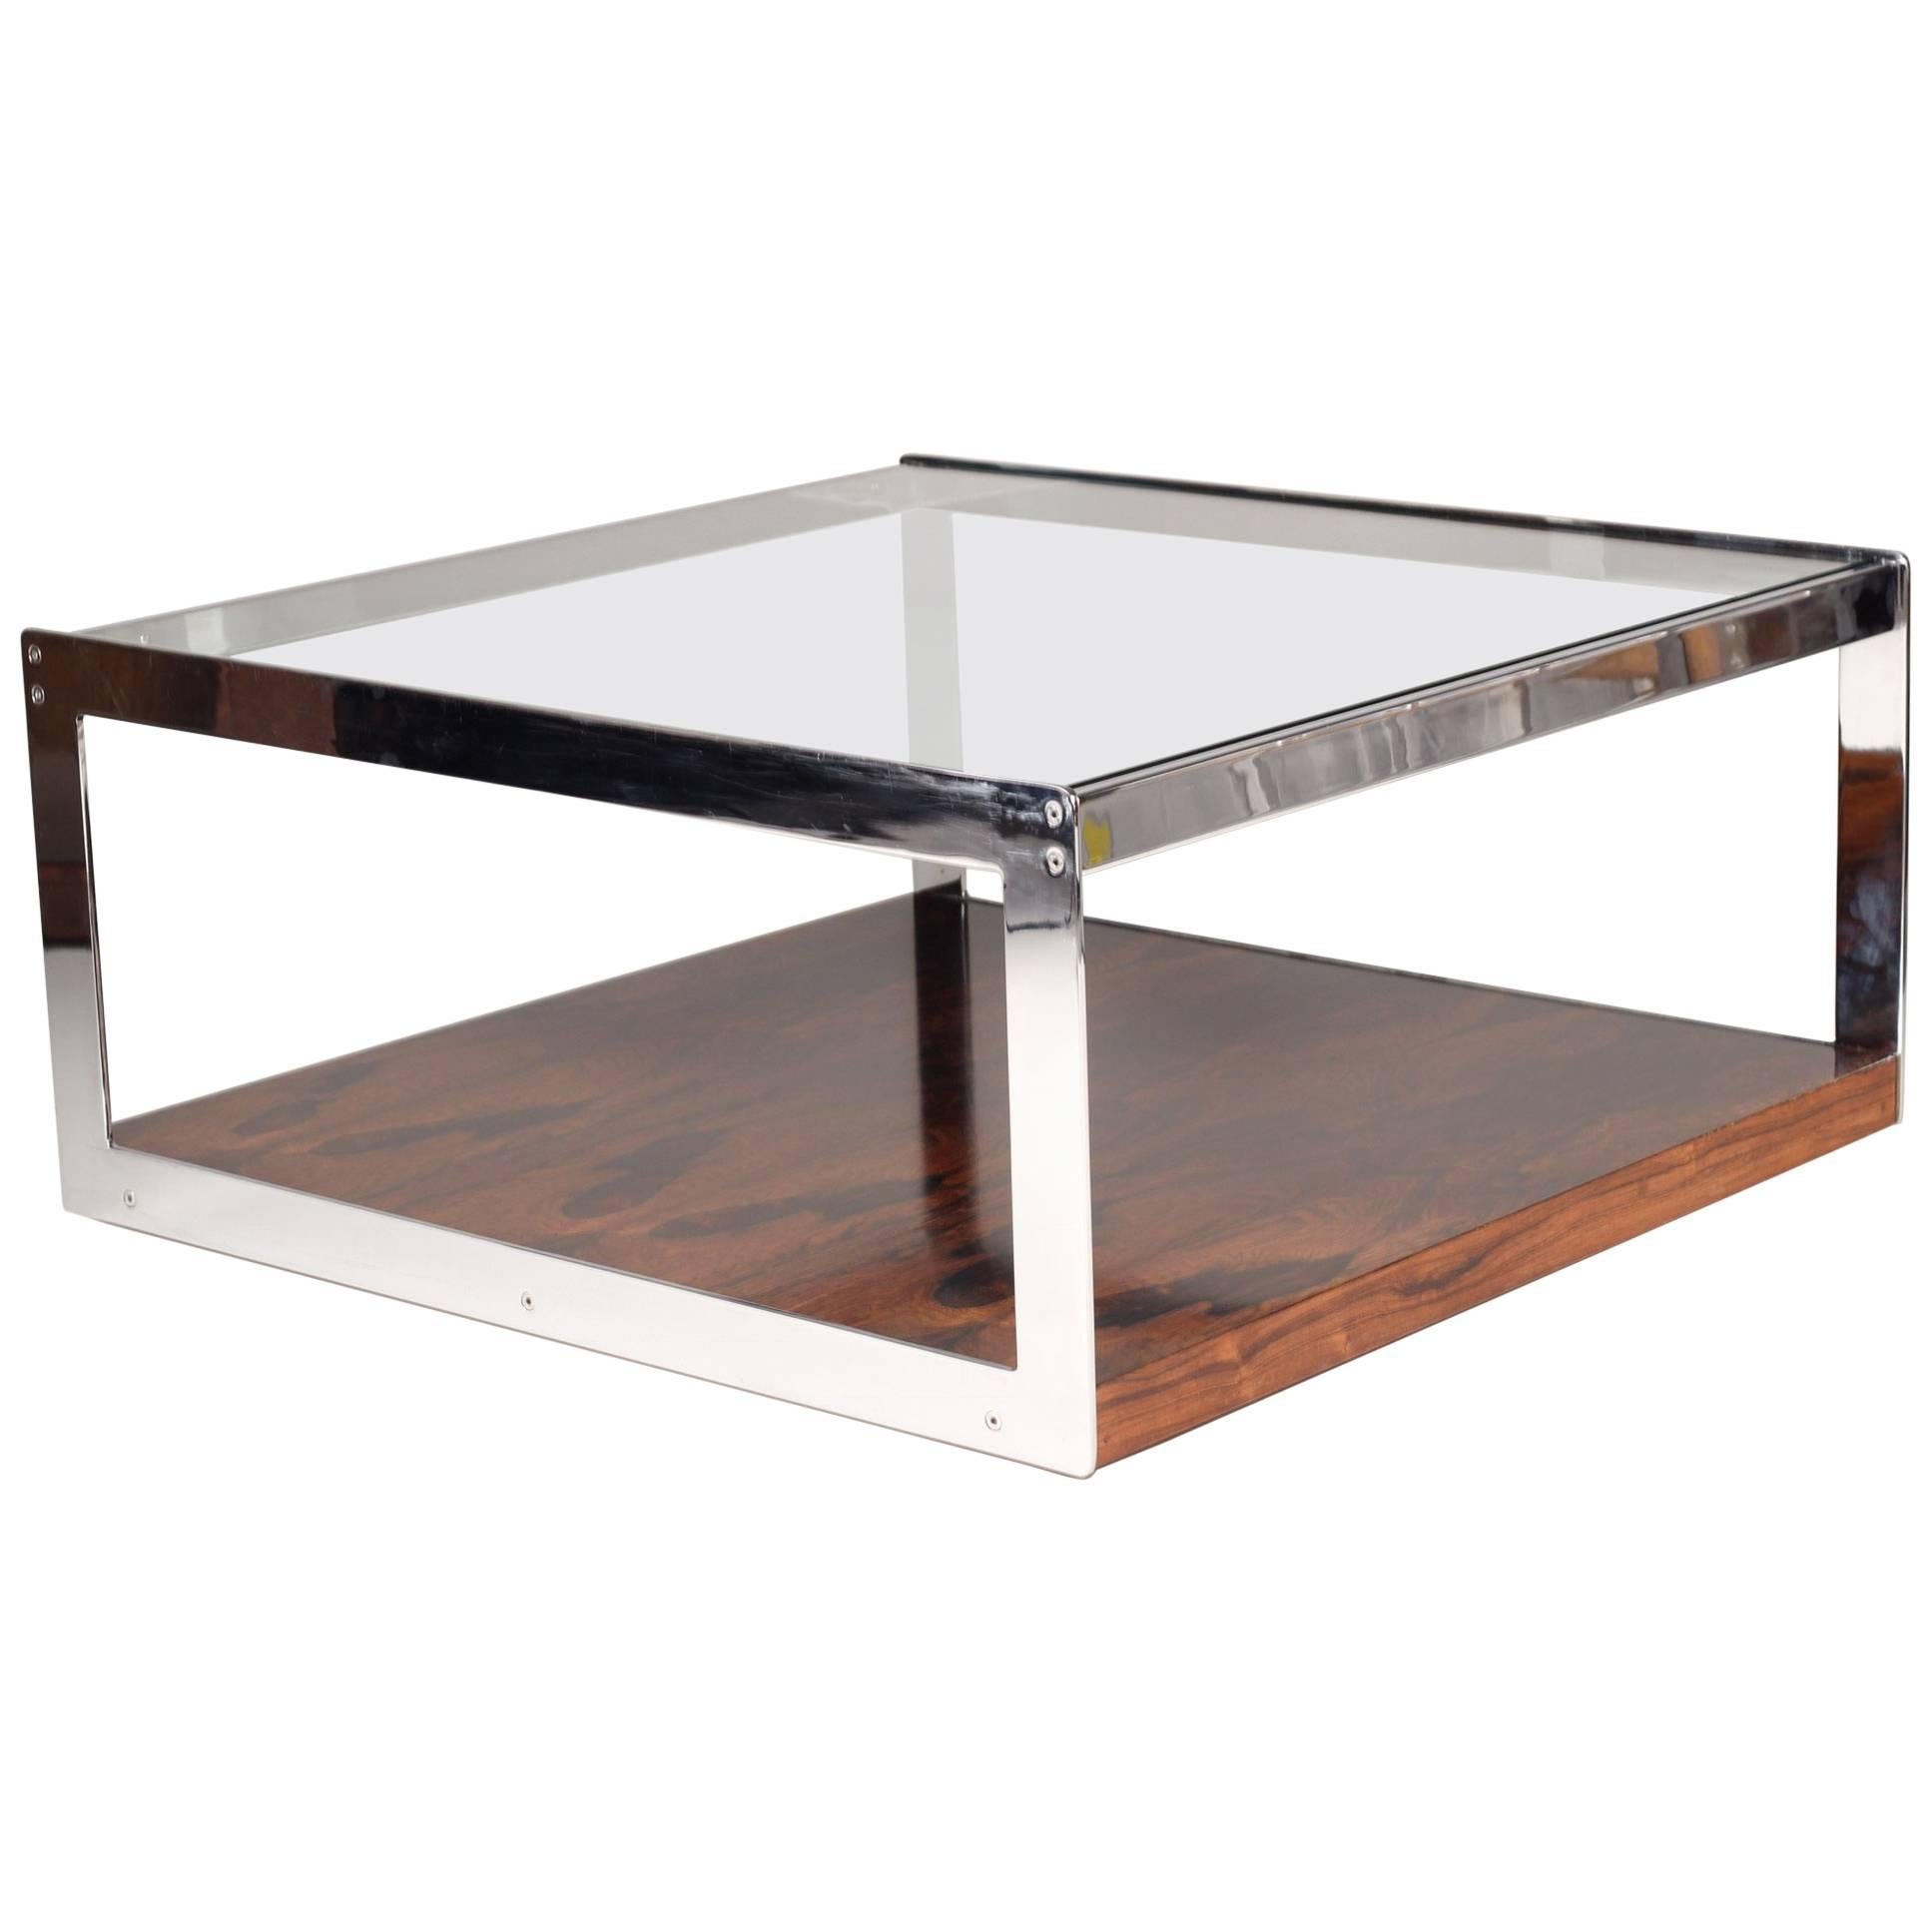 Scandinavian Modern Style Coffee Table In Chrome, Glass and Rosewood by Merrow 